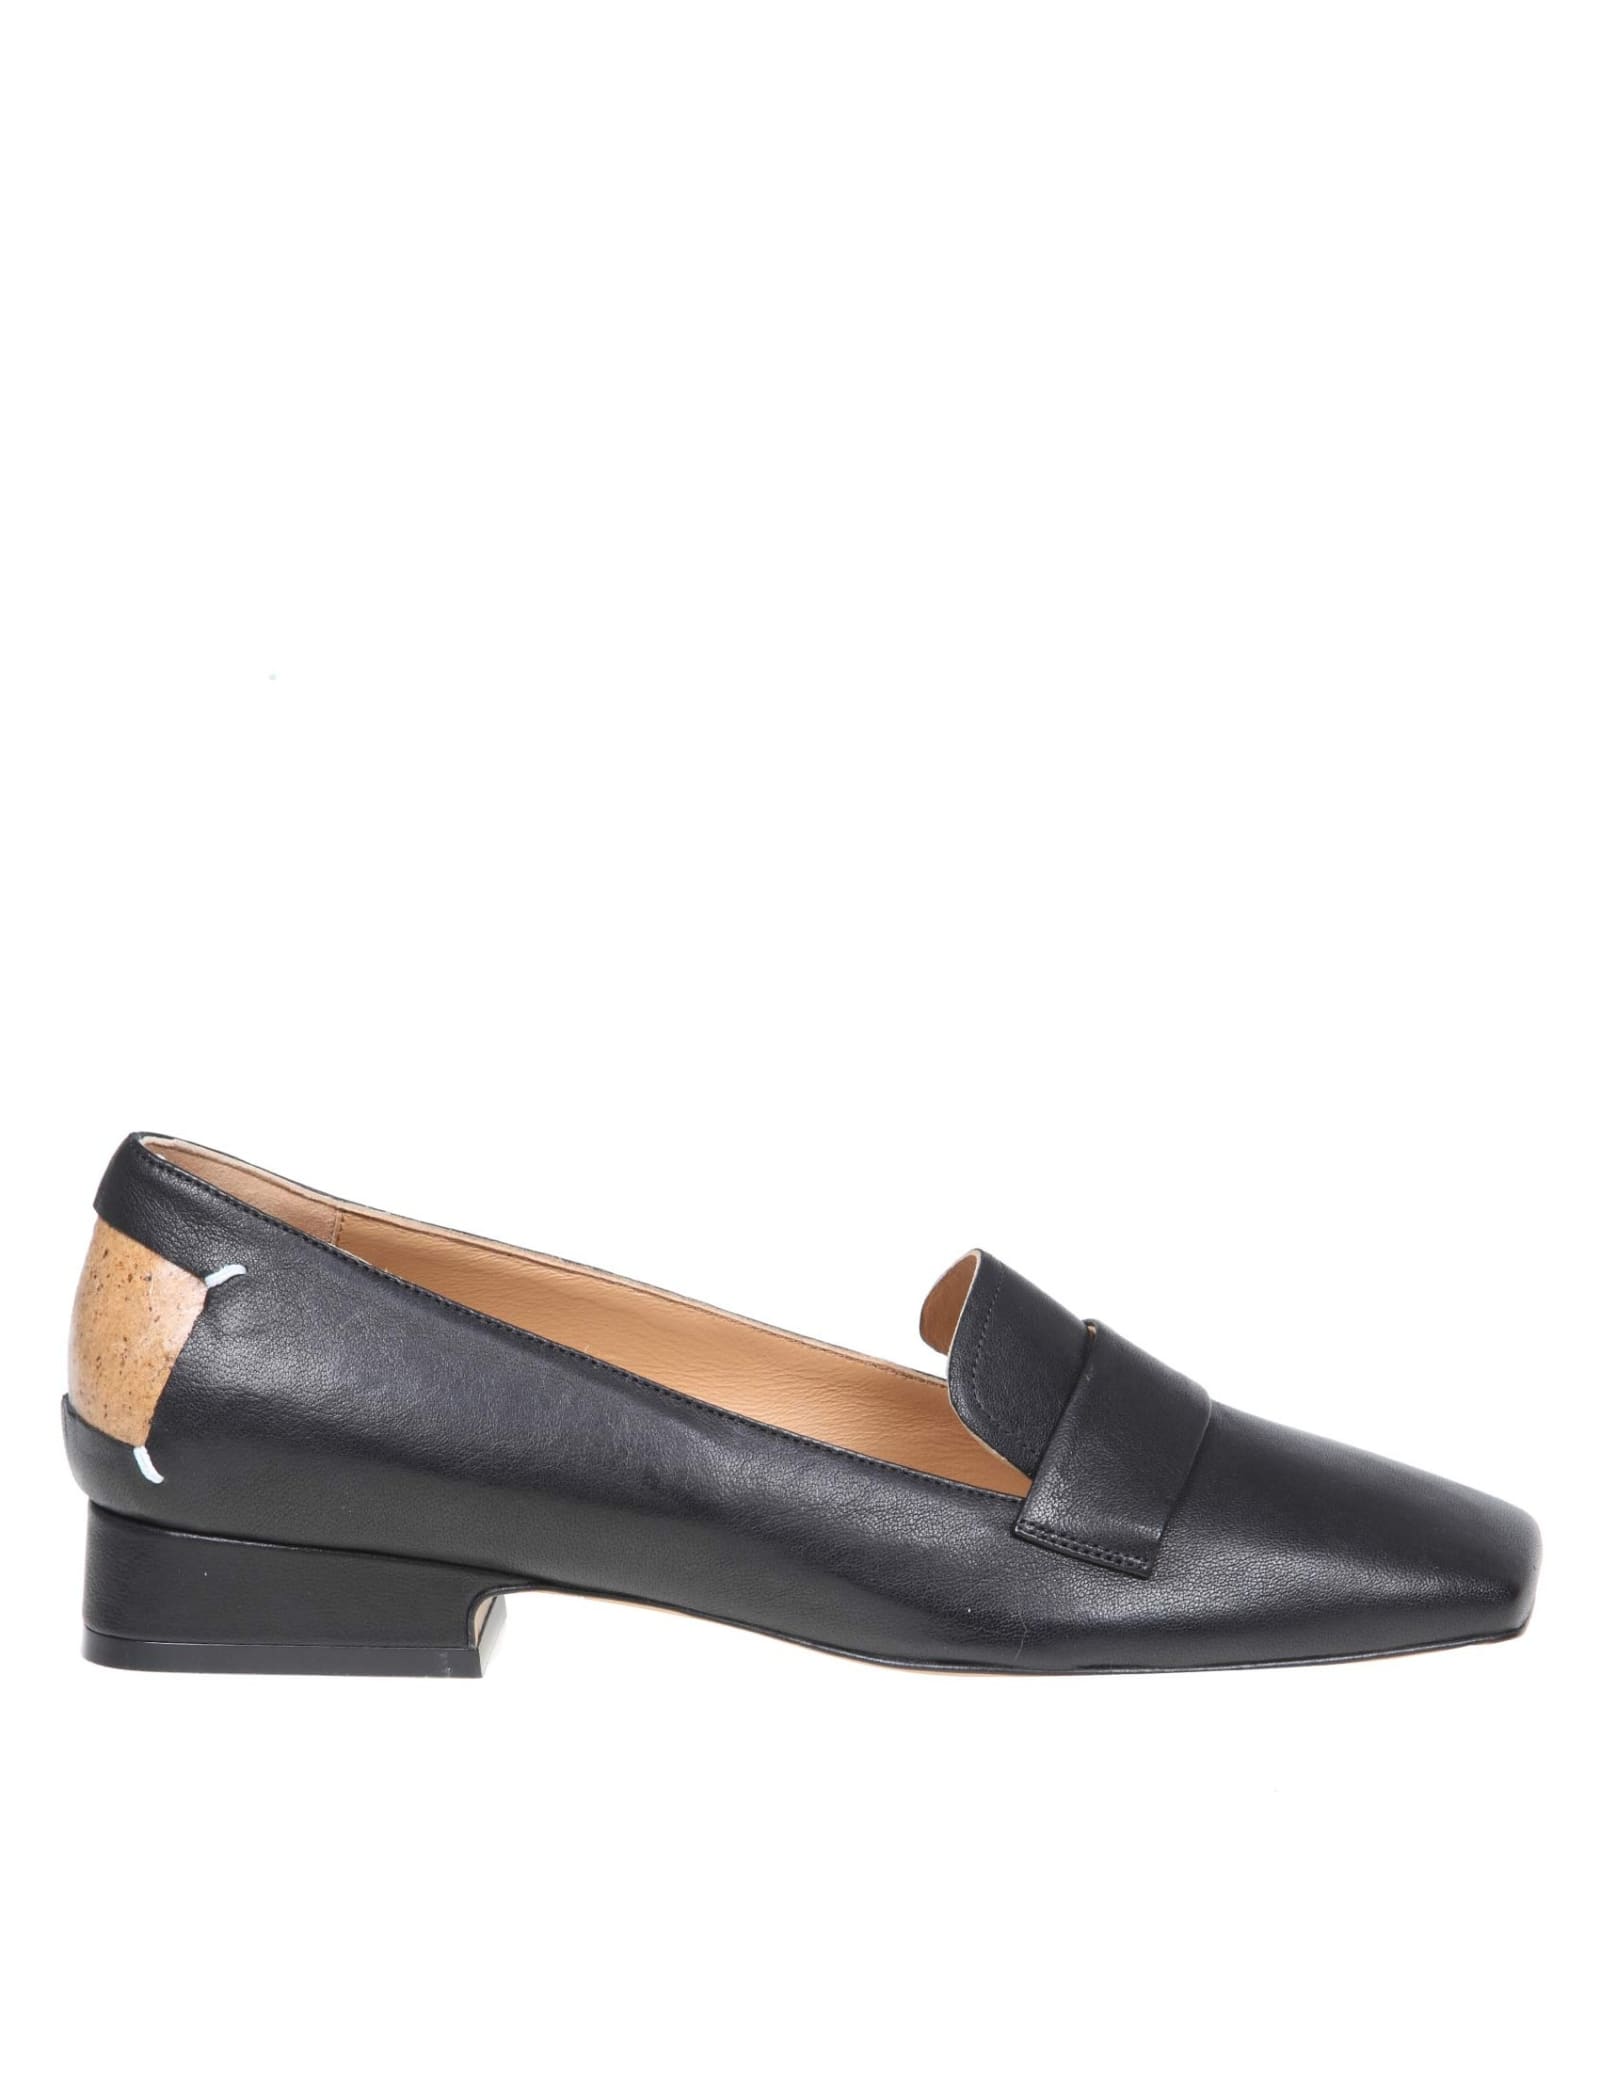 MAISON MARGIELA LOAFERS IN BLACK LEATHER